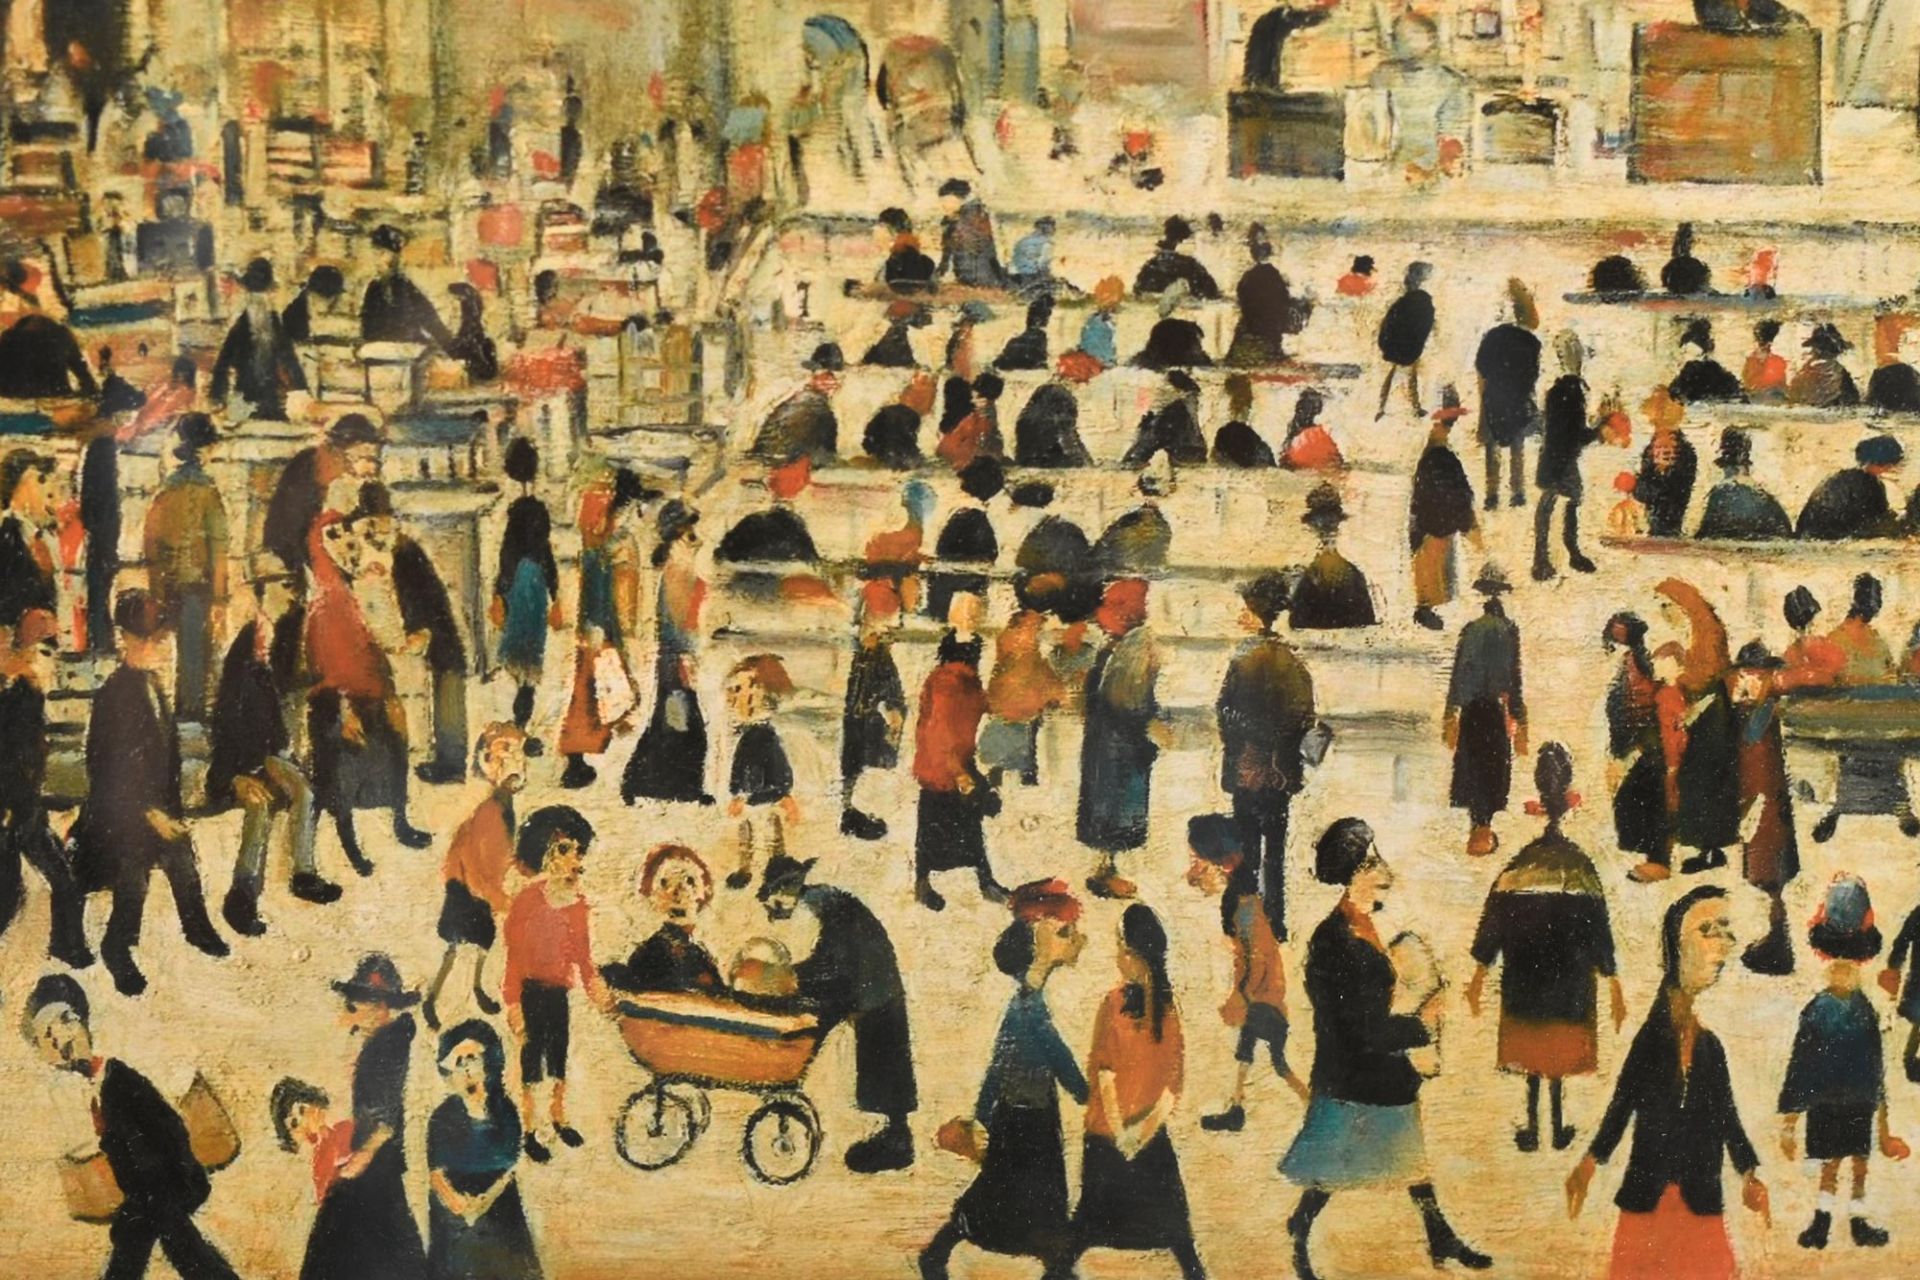 L.S. Lowry Limited Edition "The Auction" - Image 6 of 10